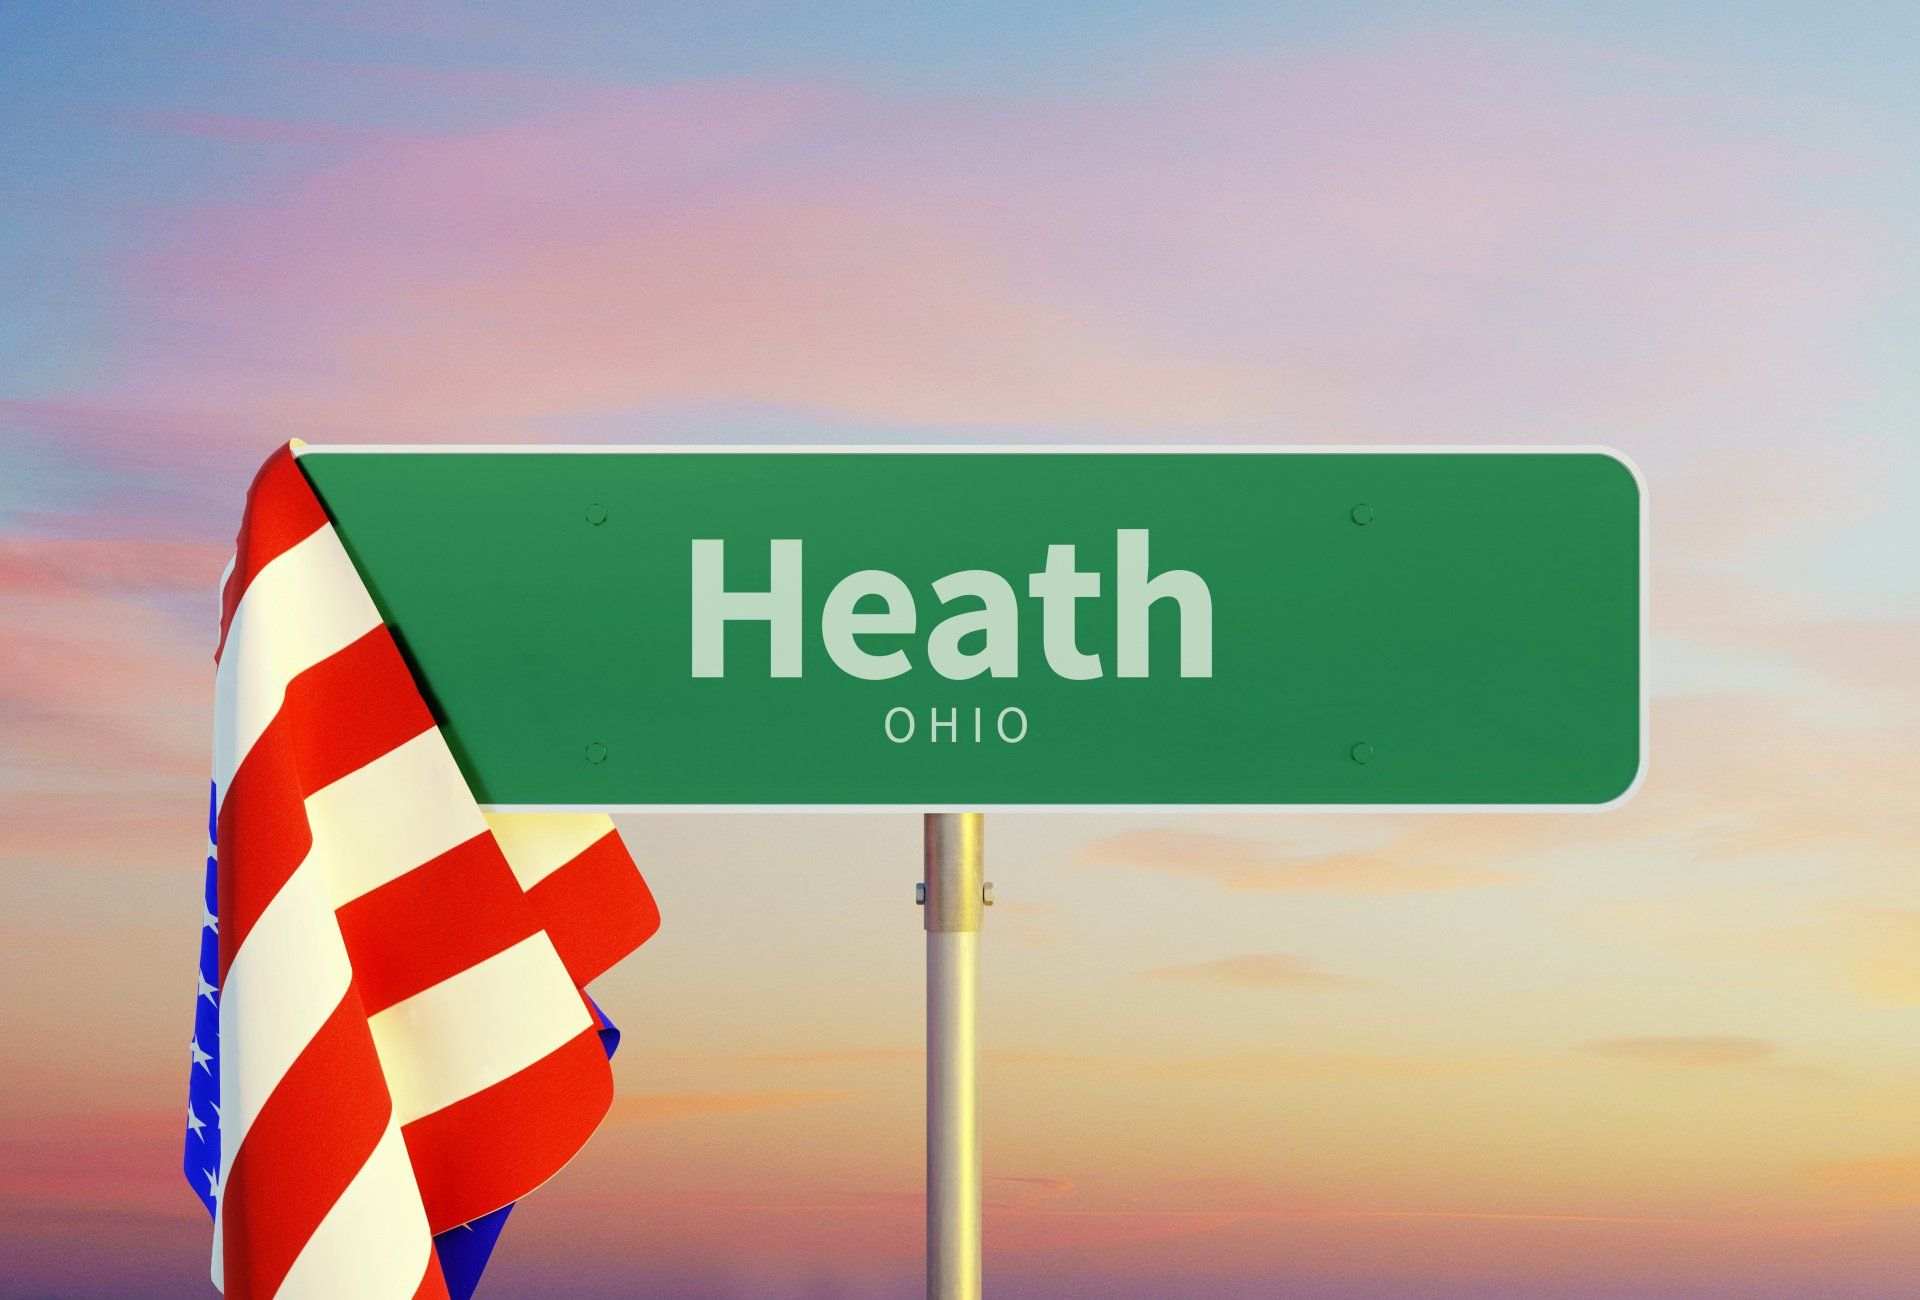 Signpost for Heath Ohio with American flag